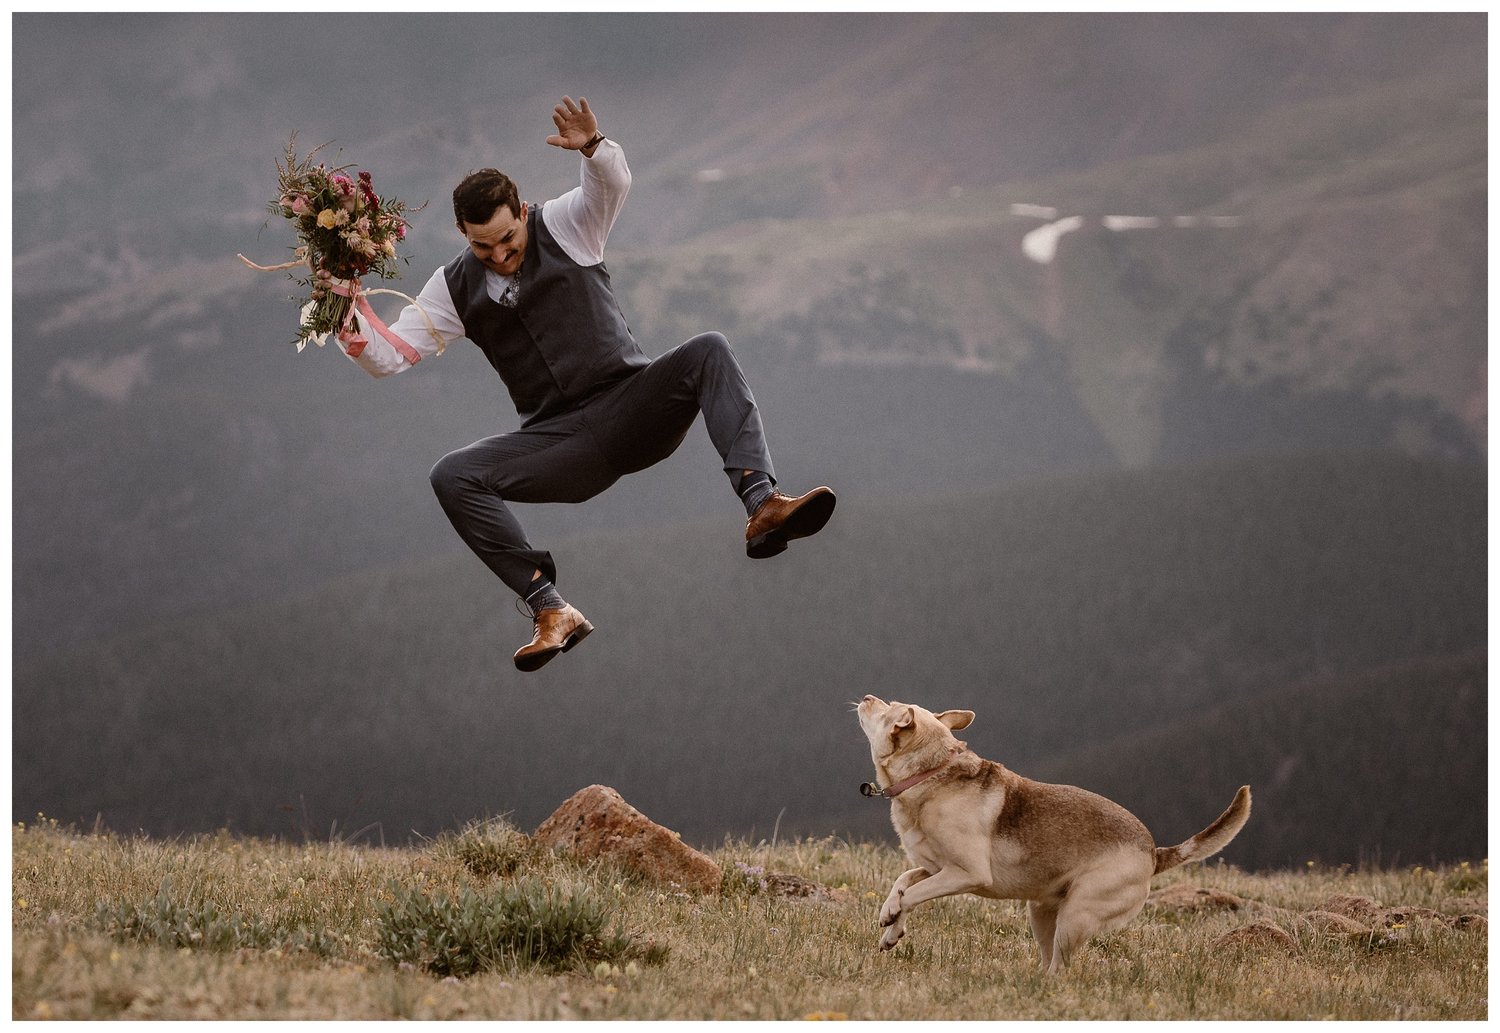 Groom jumping in the air above a dog, while holding the bride's bouquet. There are mountains in the background. 